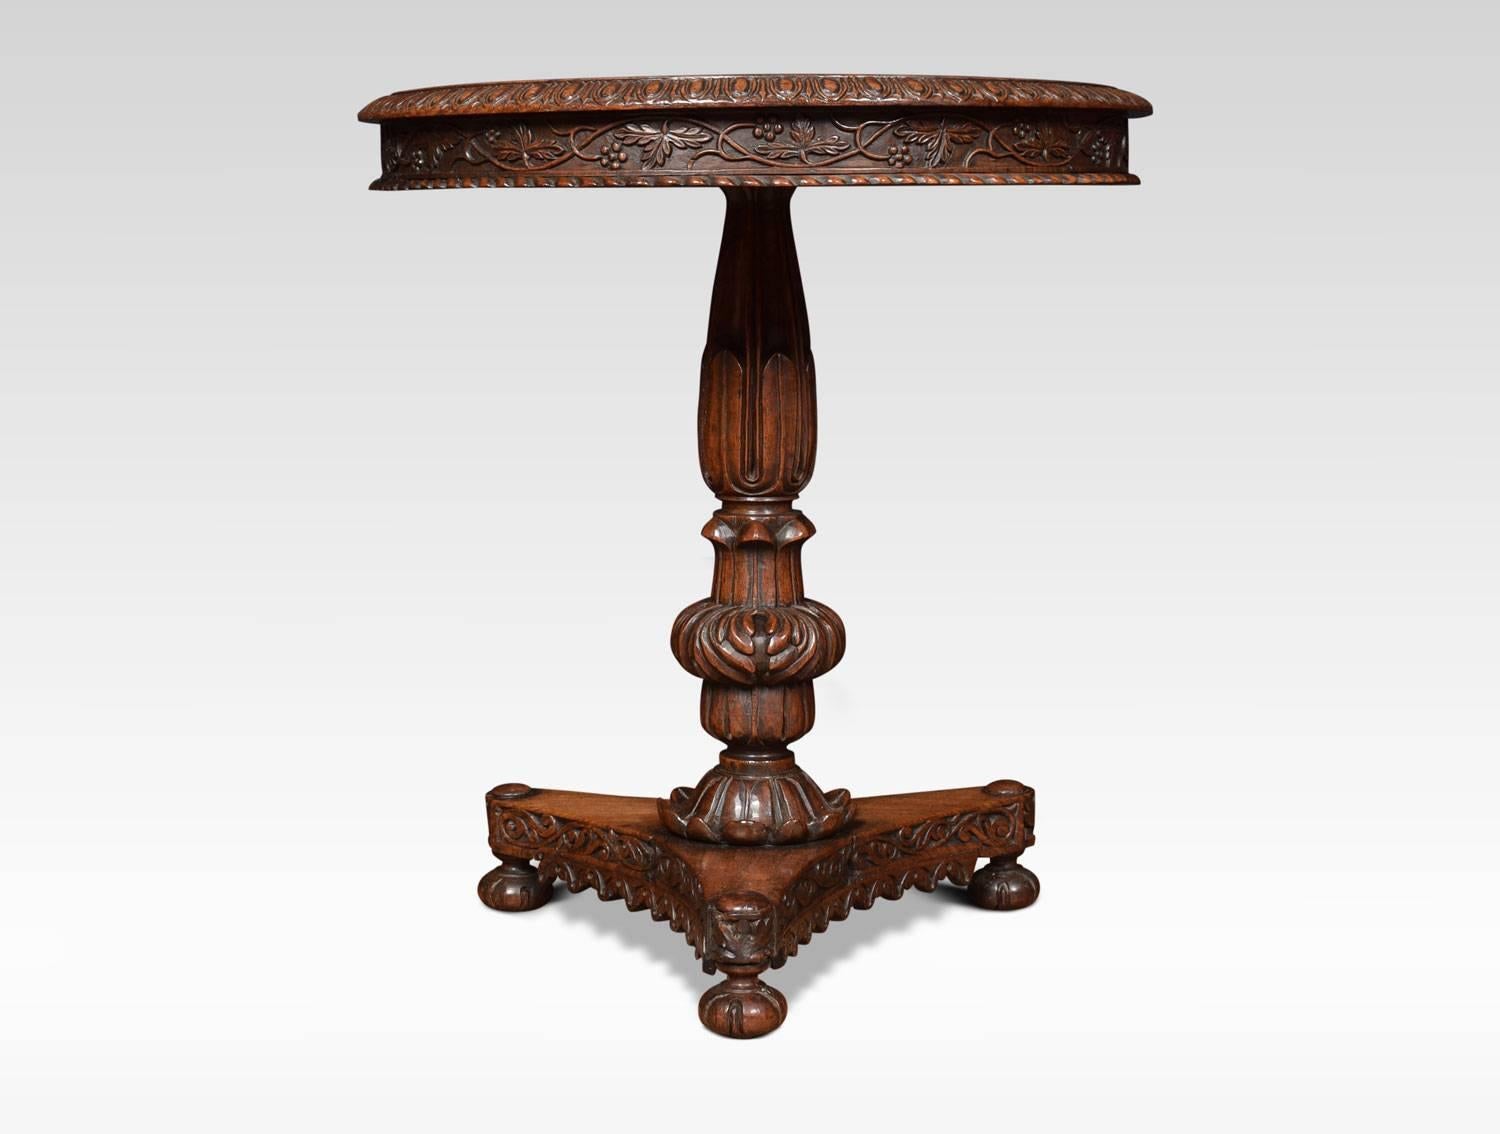 19th century rosewood lamp table, the circular top with egg and dart moulded edge above carved freeze. Raised up on carved central column and platform base. Terminating in bun feet.
Dimensions
Height 26.5 inches
Width 23.5 inches
Depth 23.5